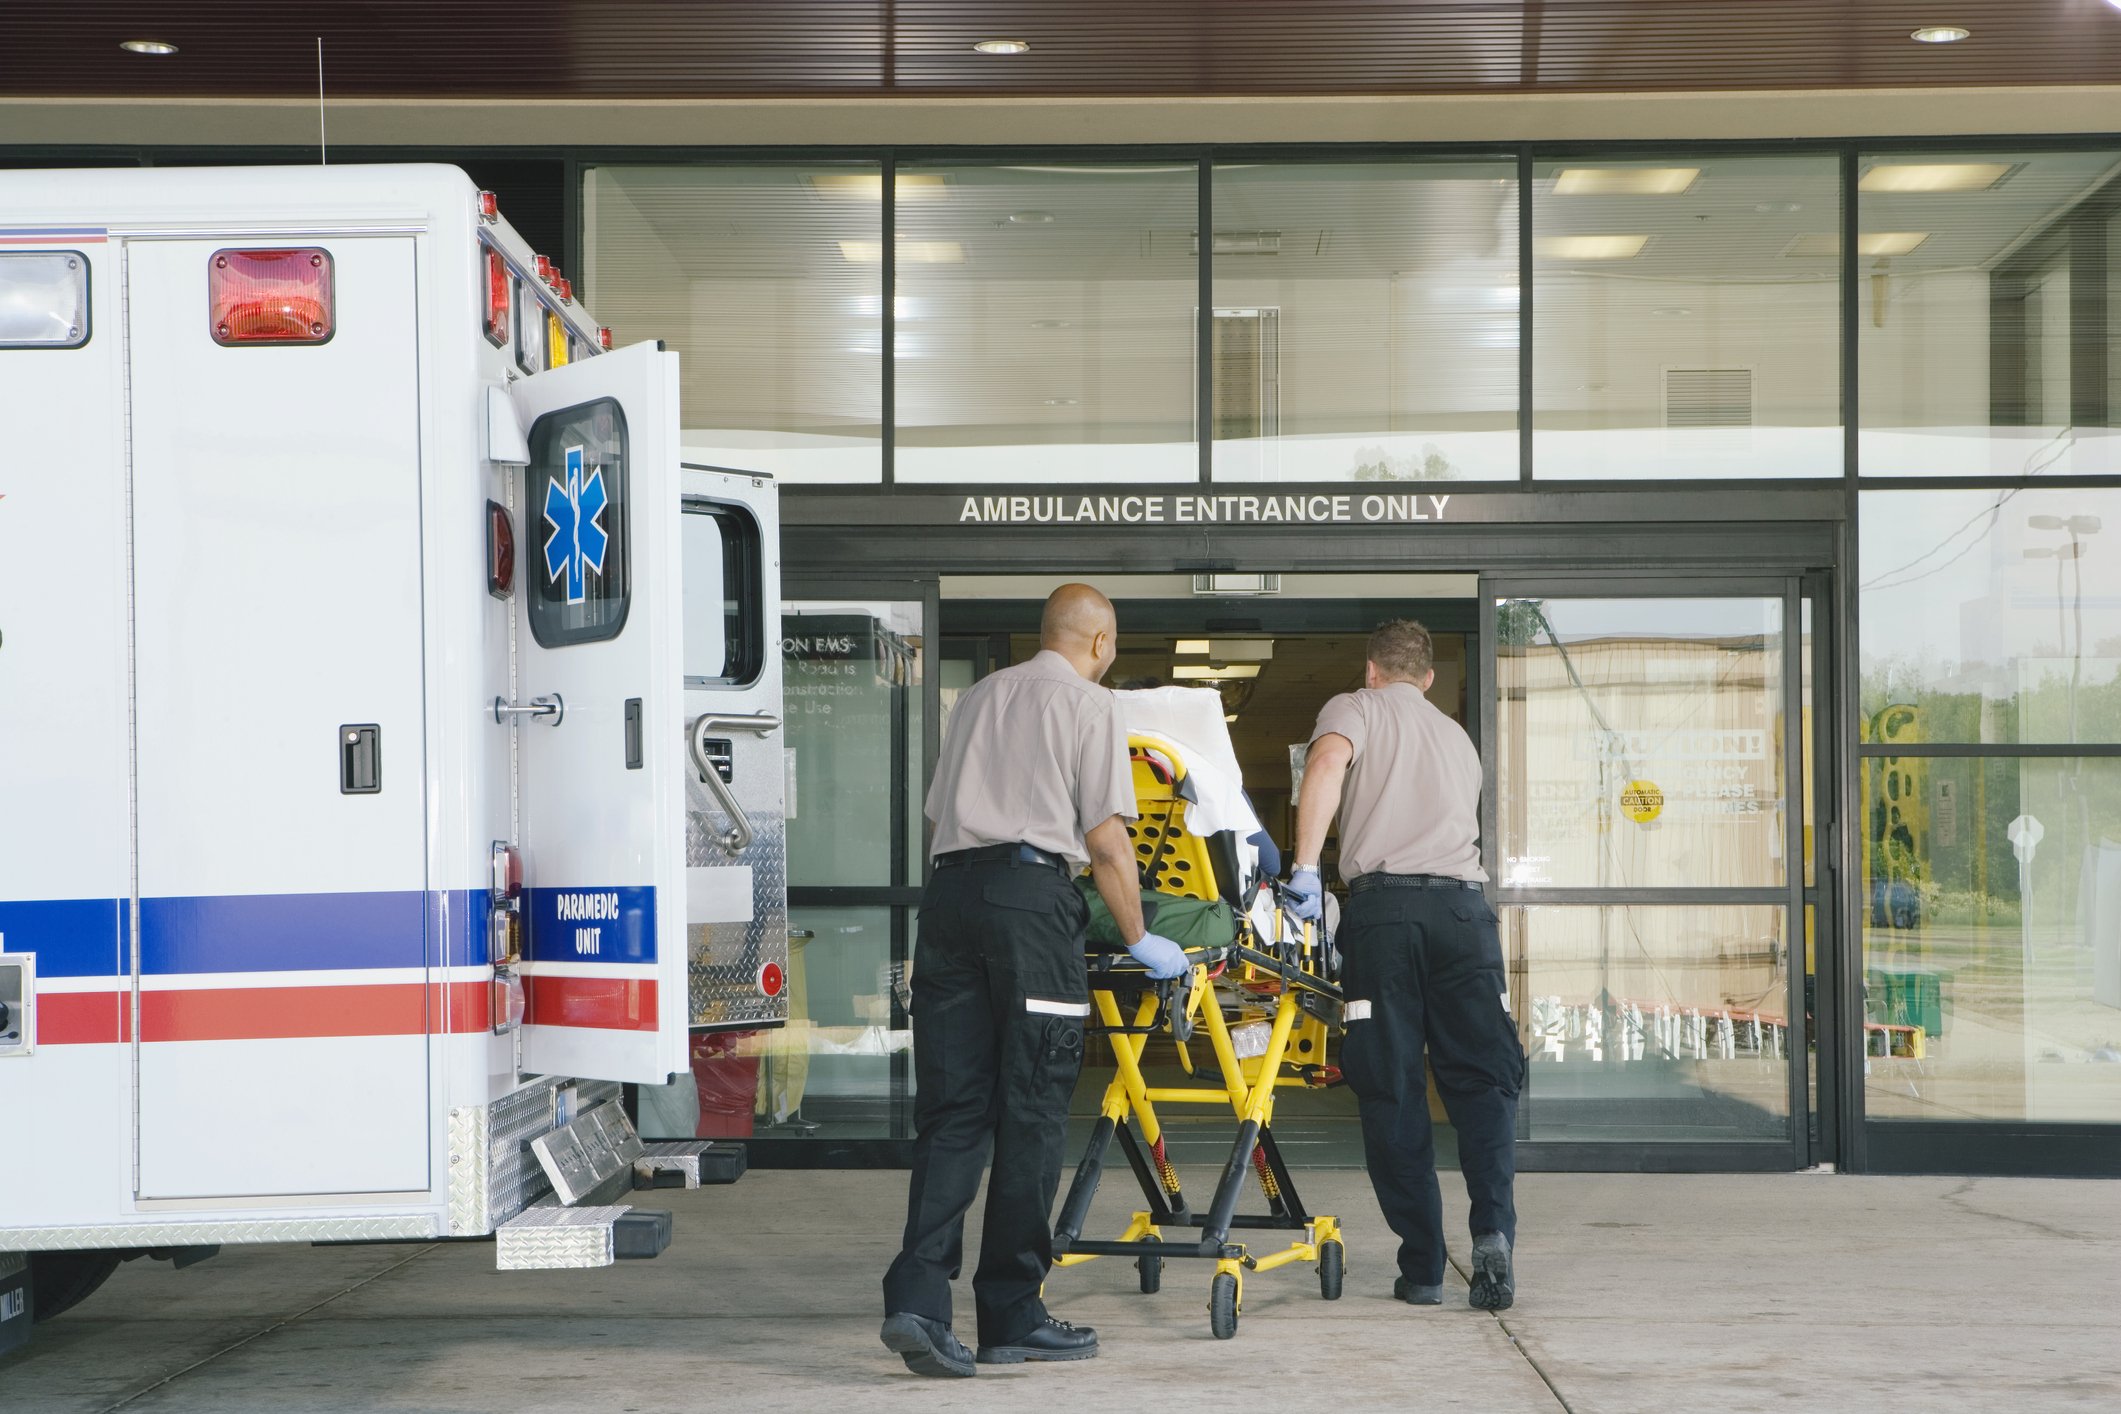 Paramedics taking patient on stretcher from ambulance to hospital. | Photo: Getty Images